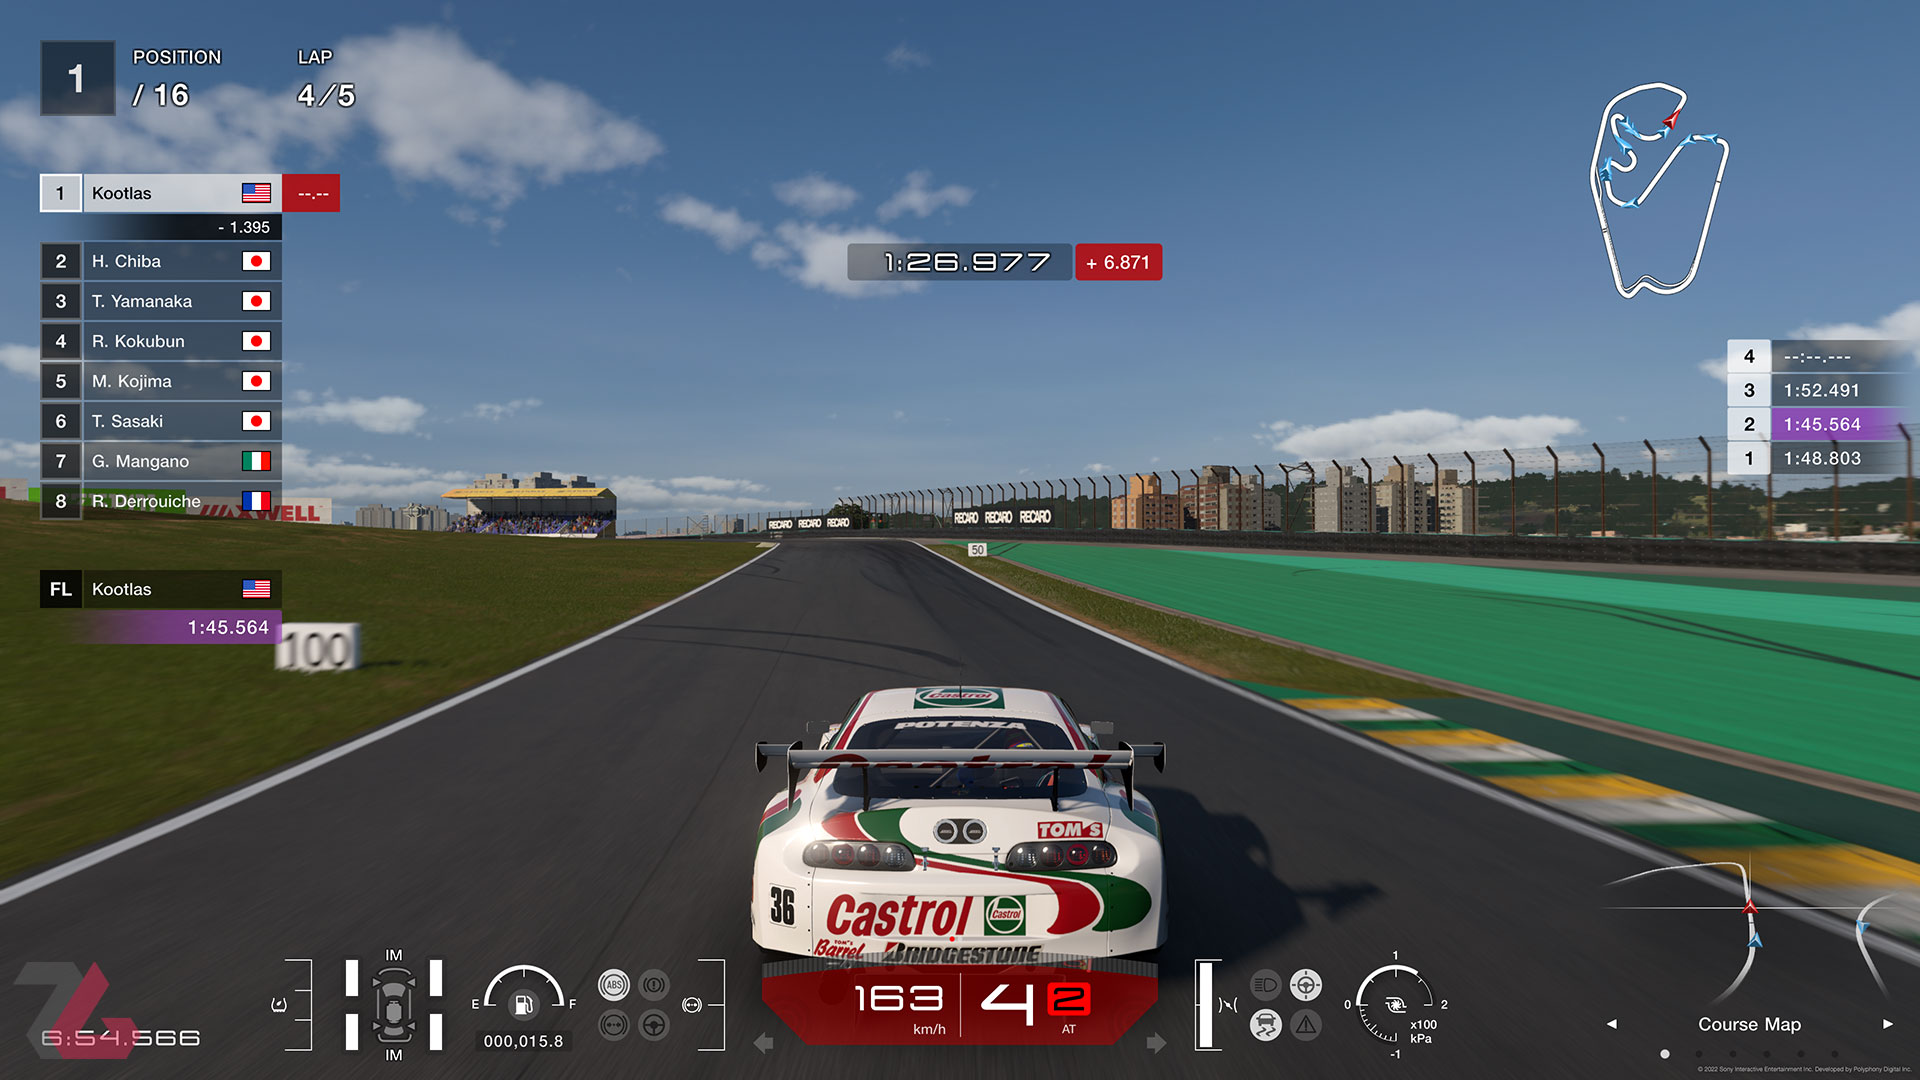 Racing in the open air at Gran Turismo 7